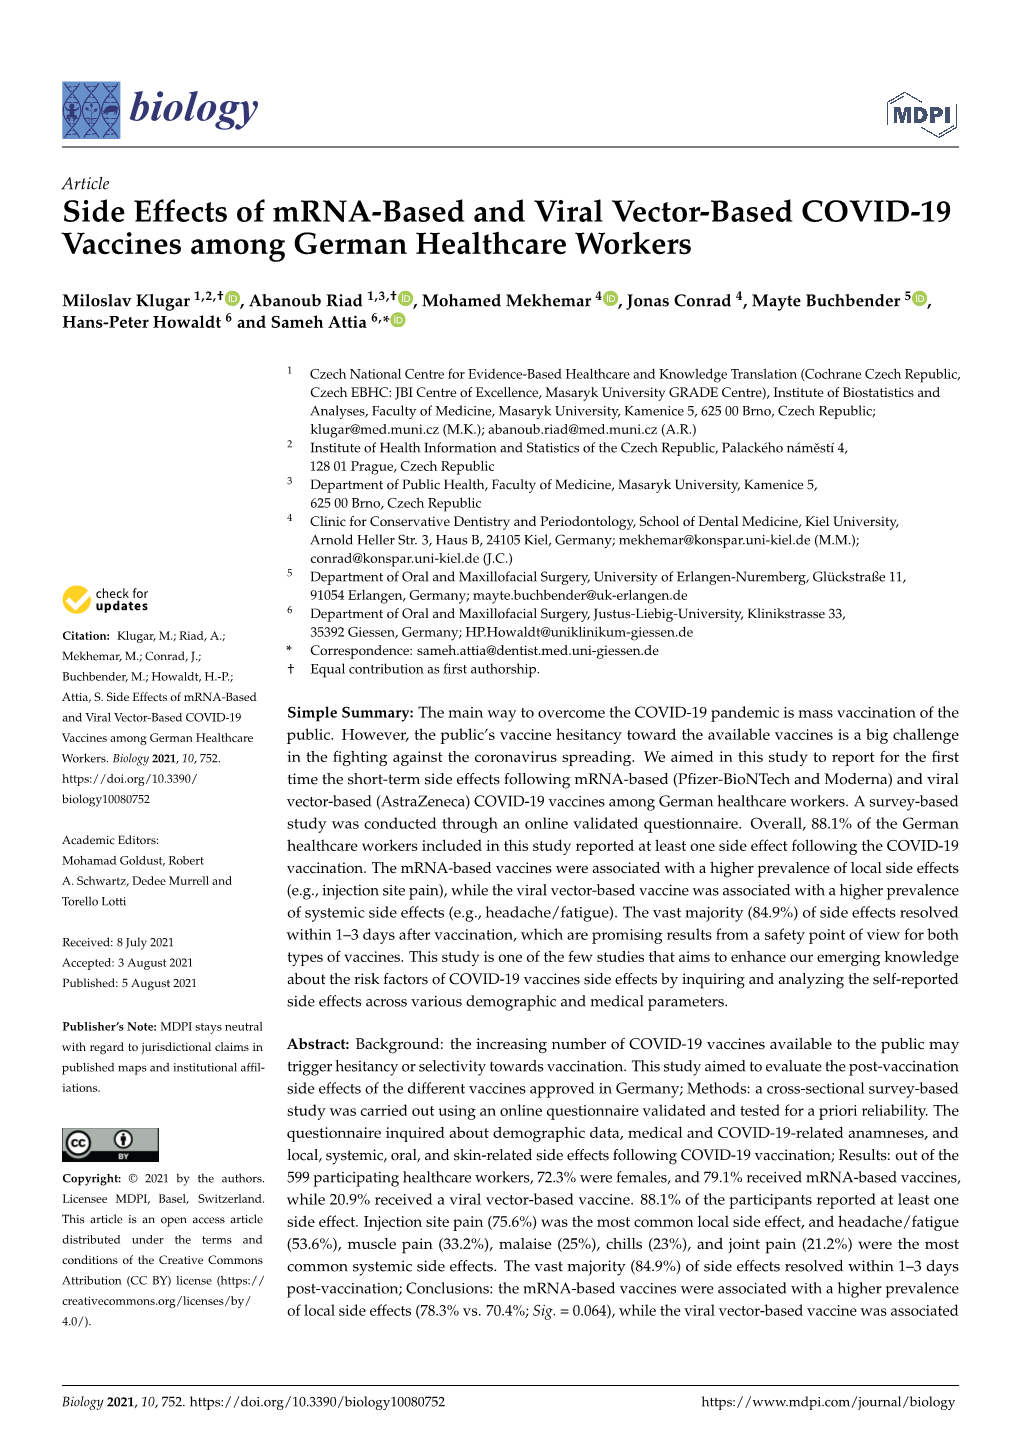 Side Effects of Mrna-Based and Viral Vector-Based COVID-19 Vaccines Among German Healthcare Workers